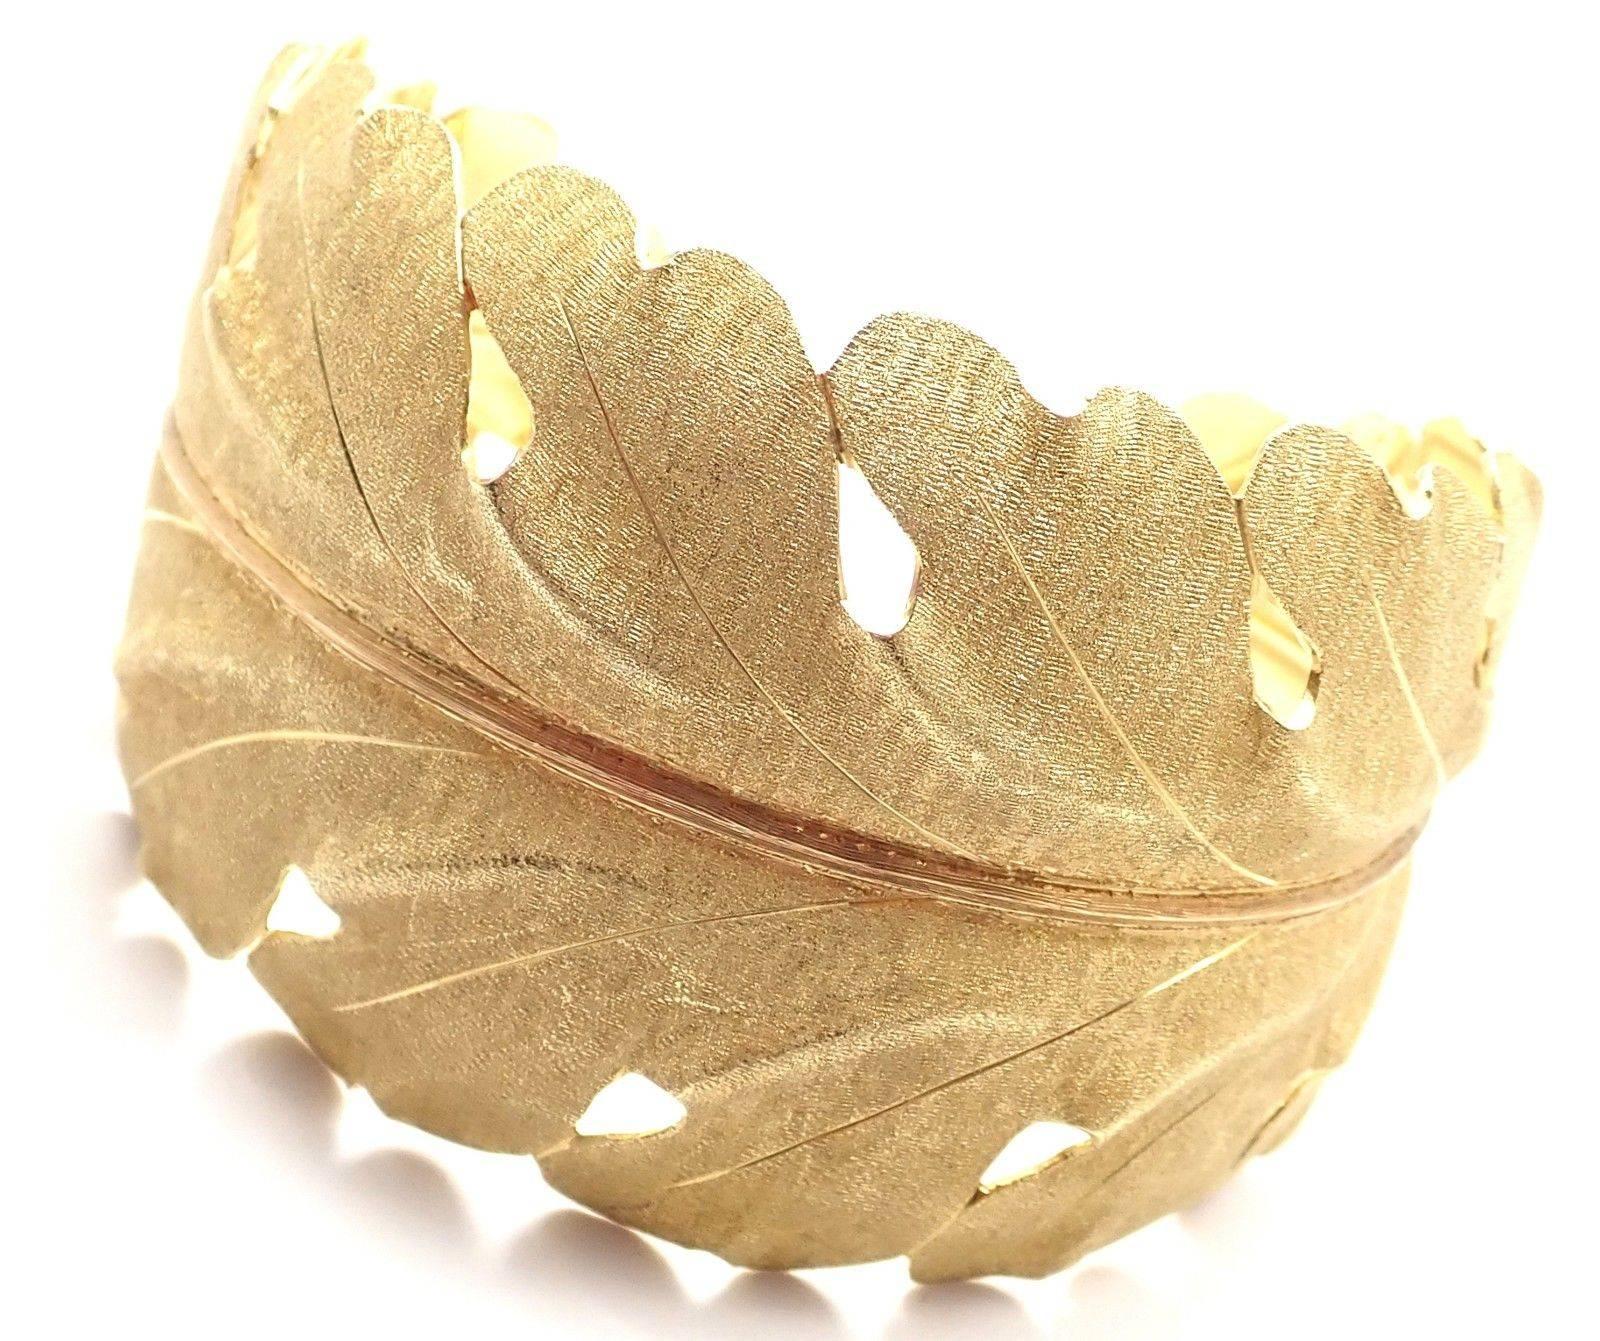 18k Yellow Gold Wide Cuff Leaf Motif Bangle Bracelet by Mario Buccellati.
This bracelet comes with original box.
Details: 
Length: 7